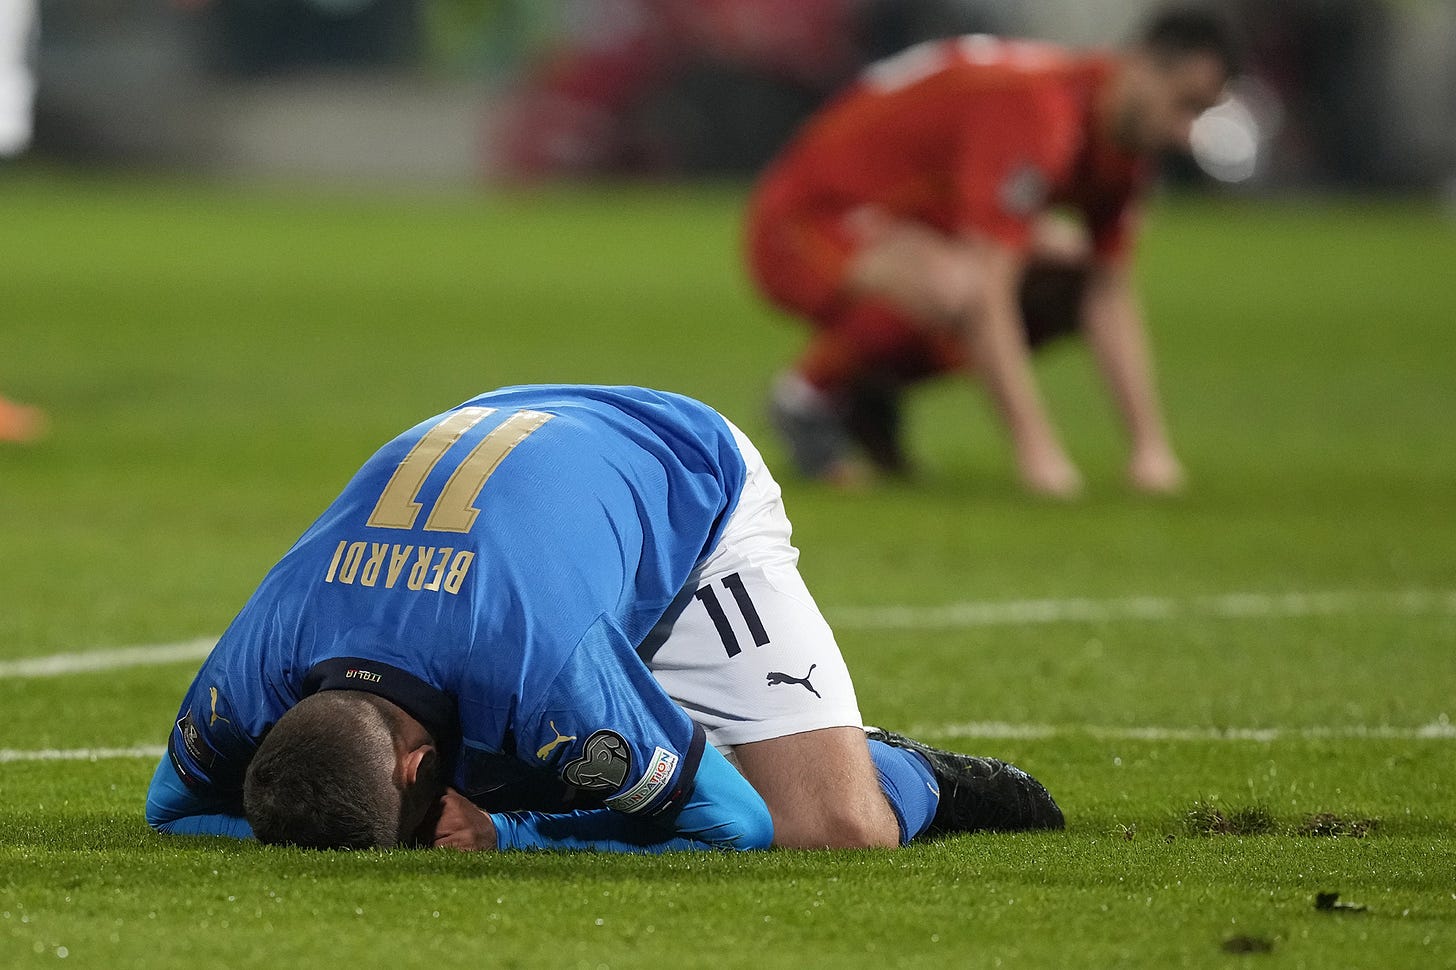 Italy miss World Cup again after wild loss to North Macedonia